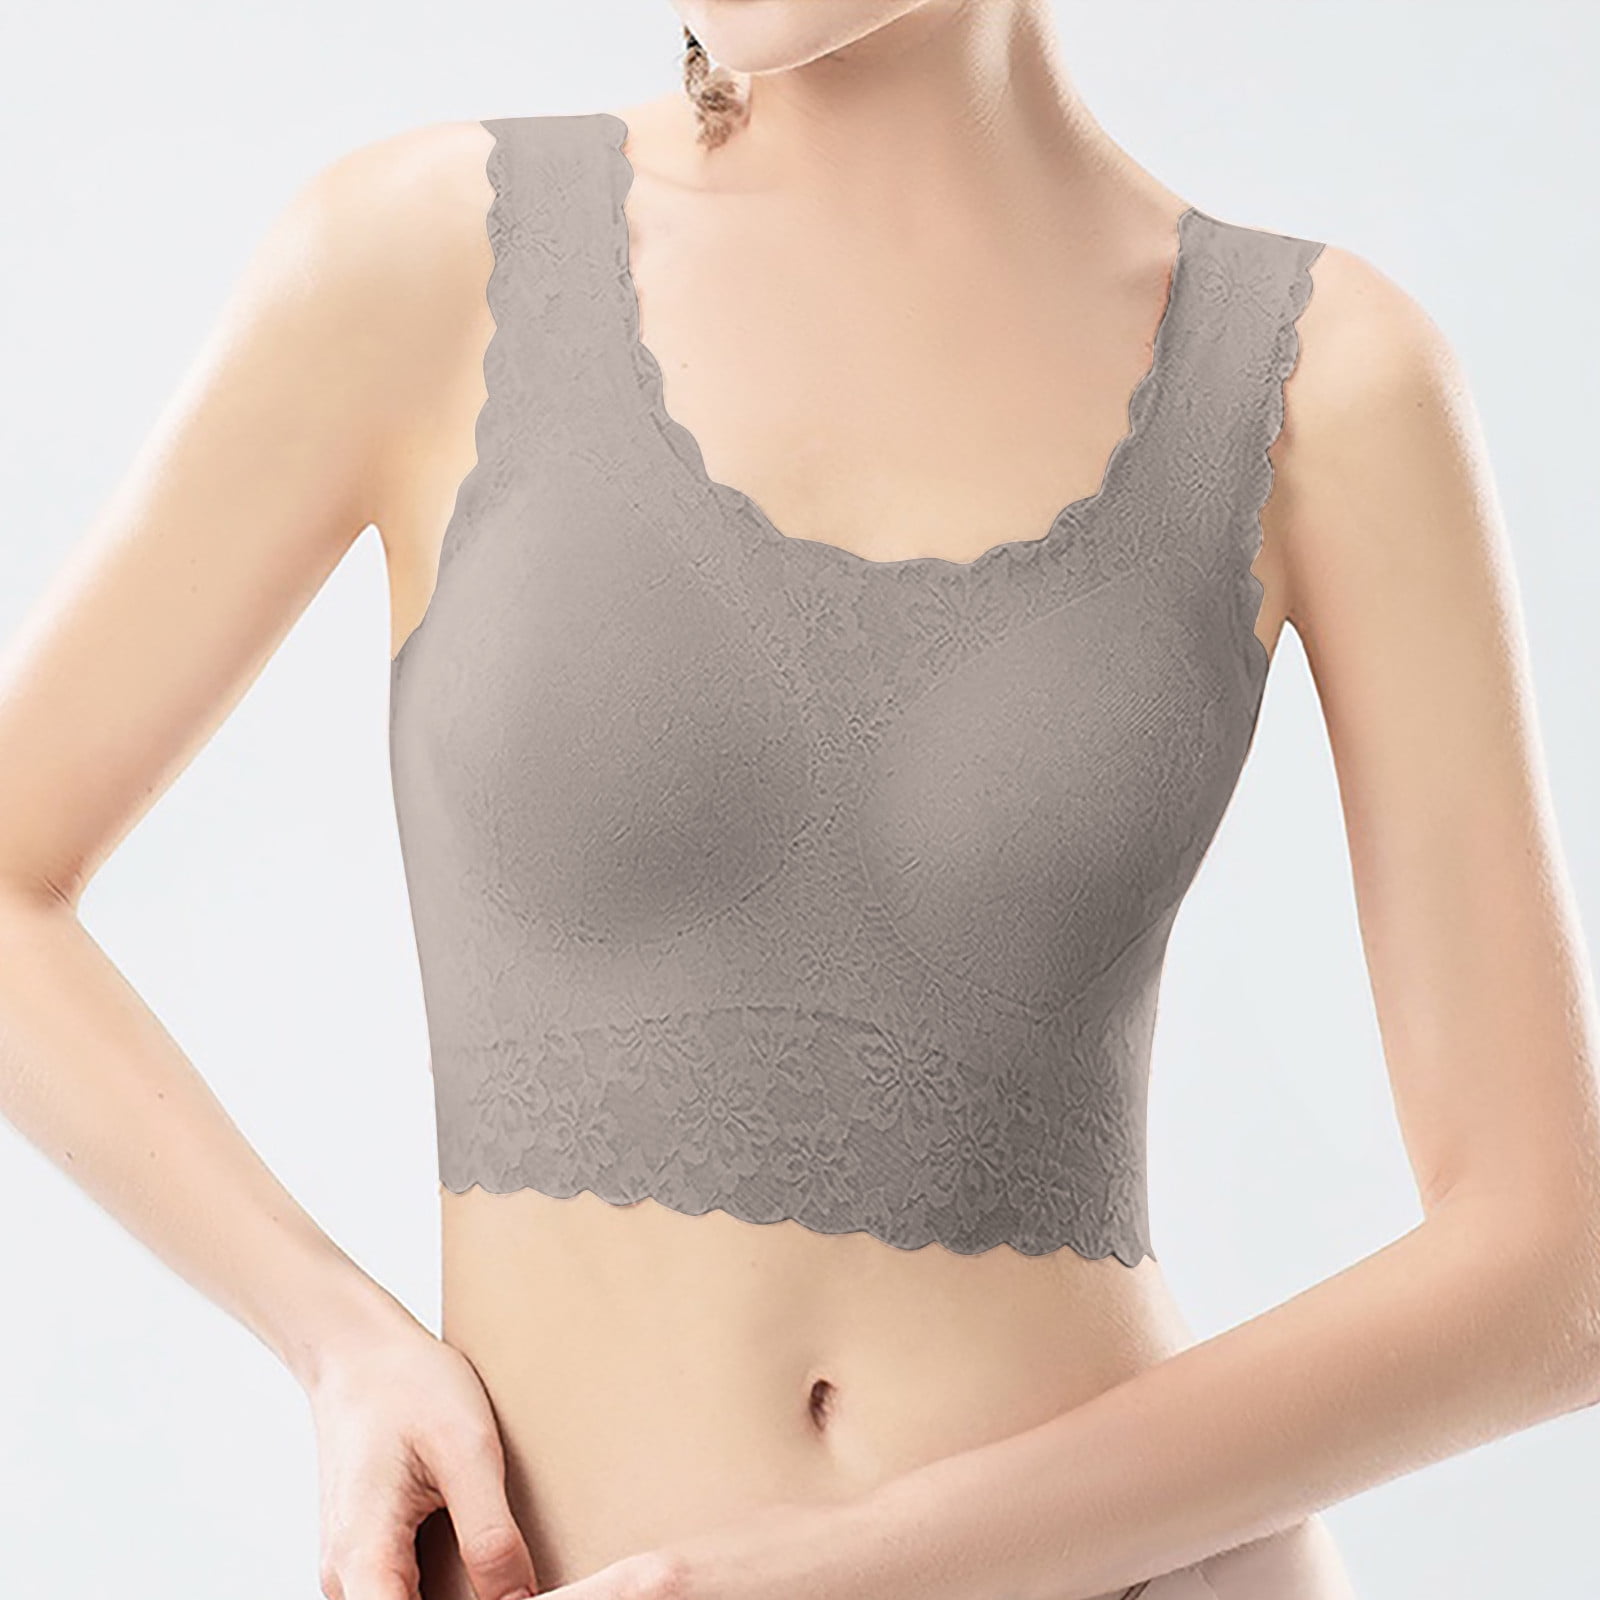 MuseOnly Support Big Boobs Pullover Wireless Sleep Bra Daily or